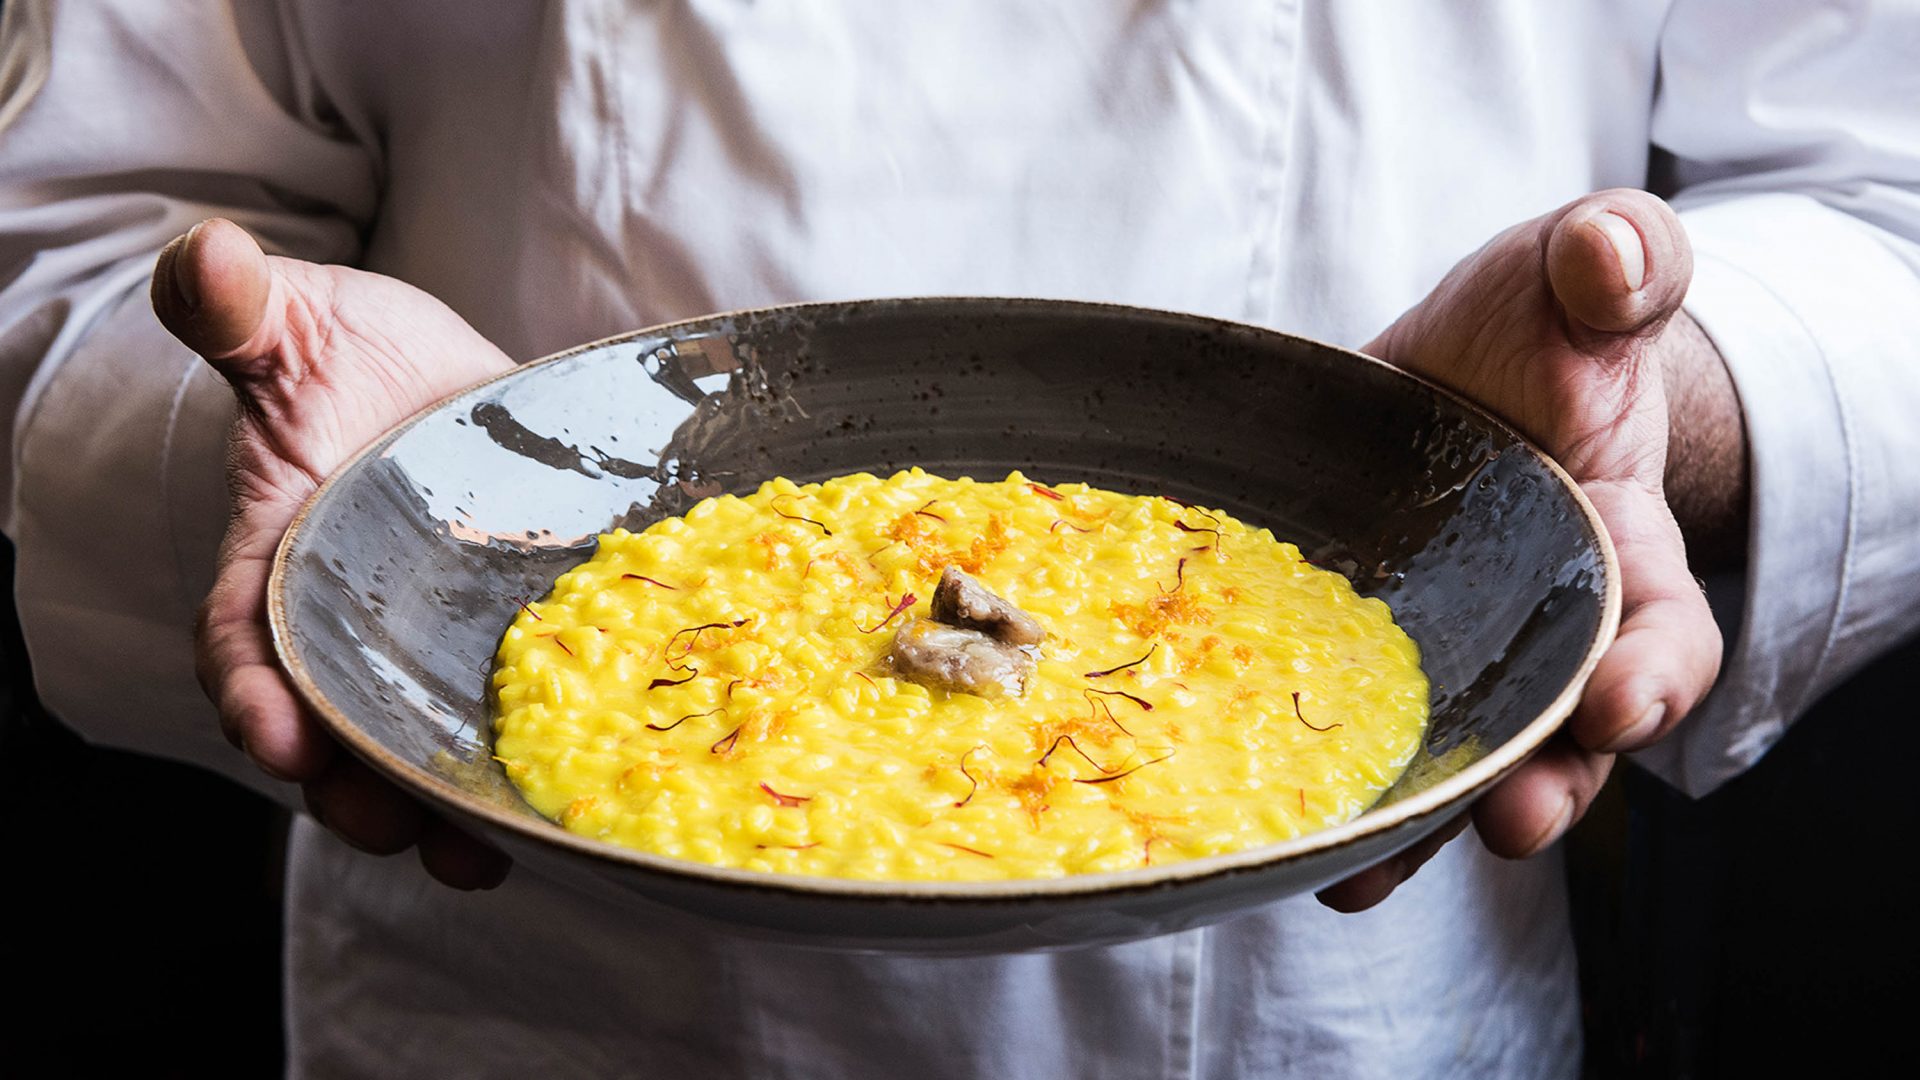 The chef on a mission to save Milanese risotto from Michelin-starred “contamination”